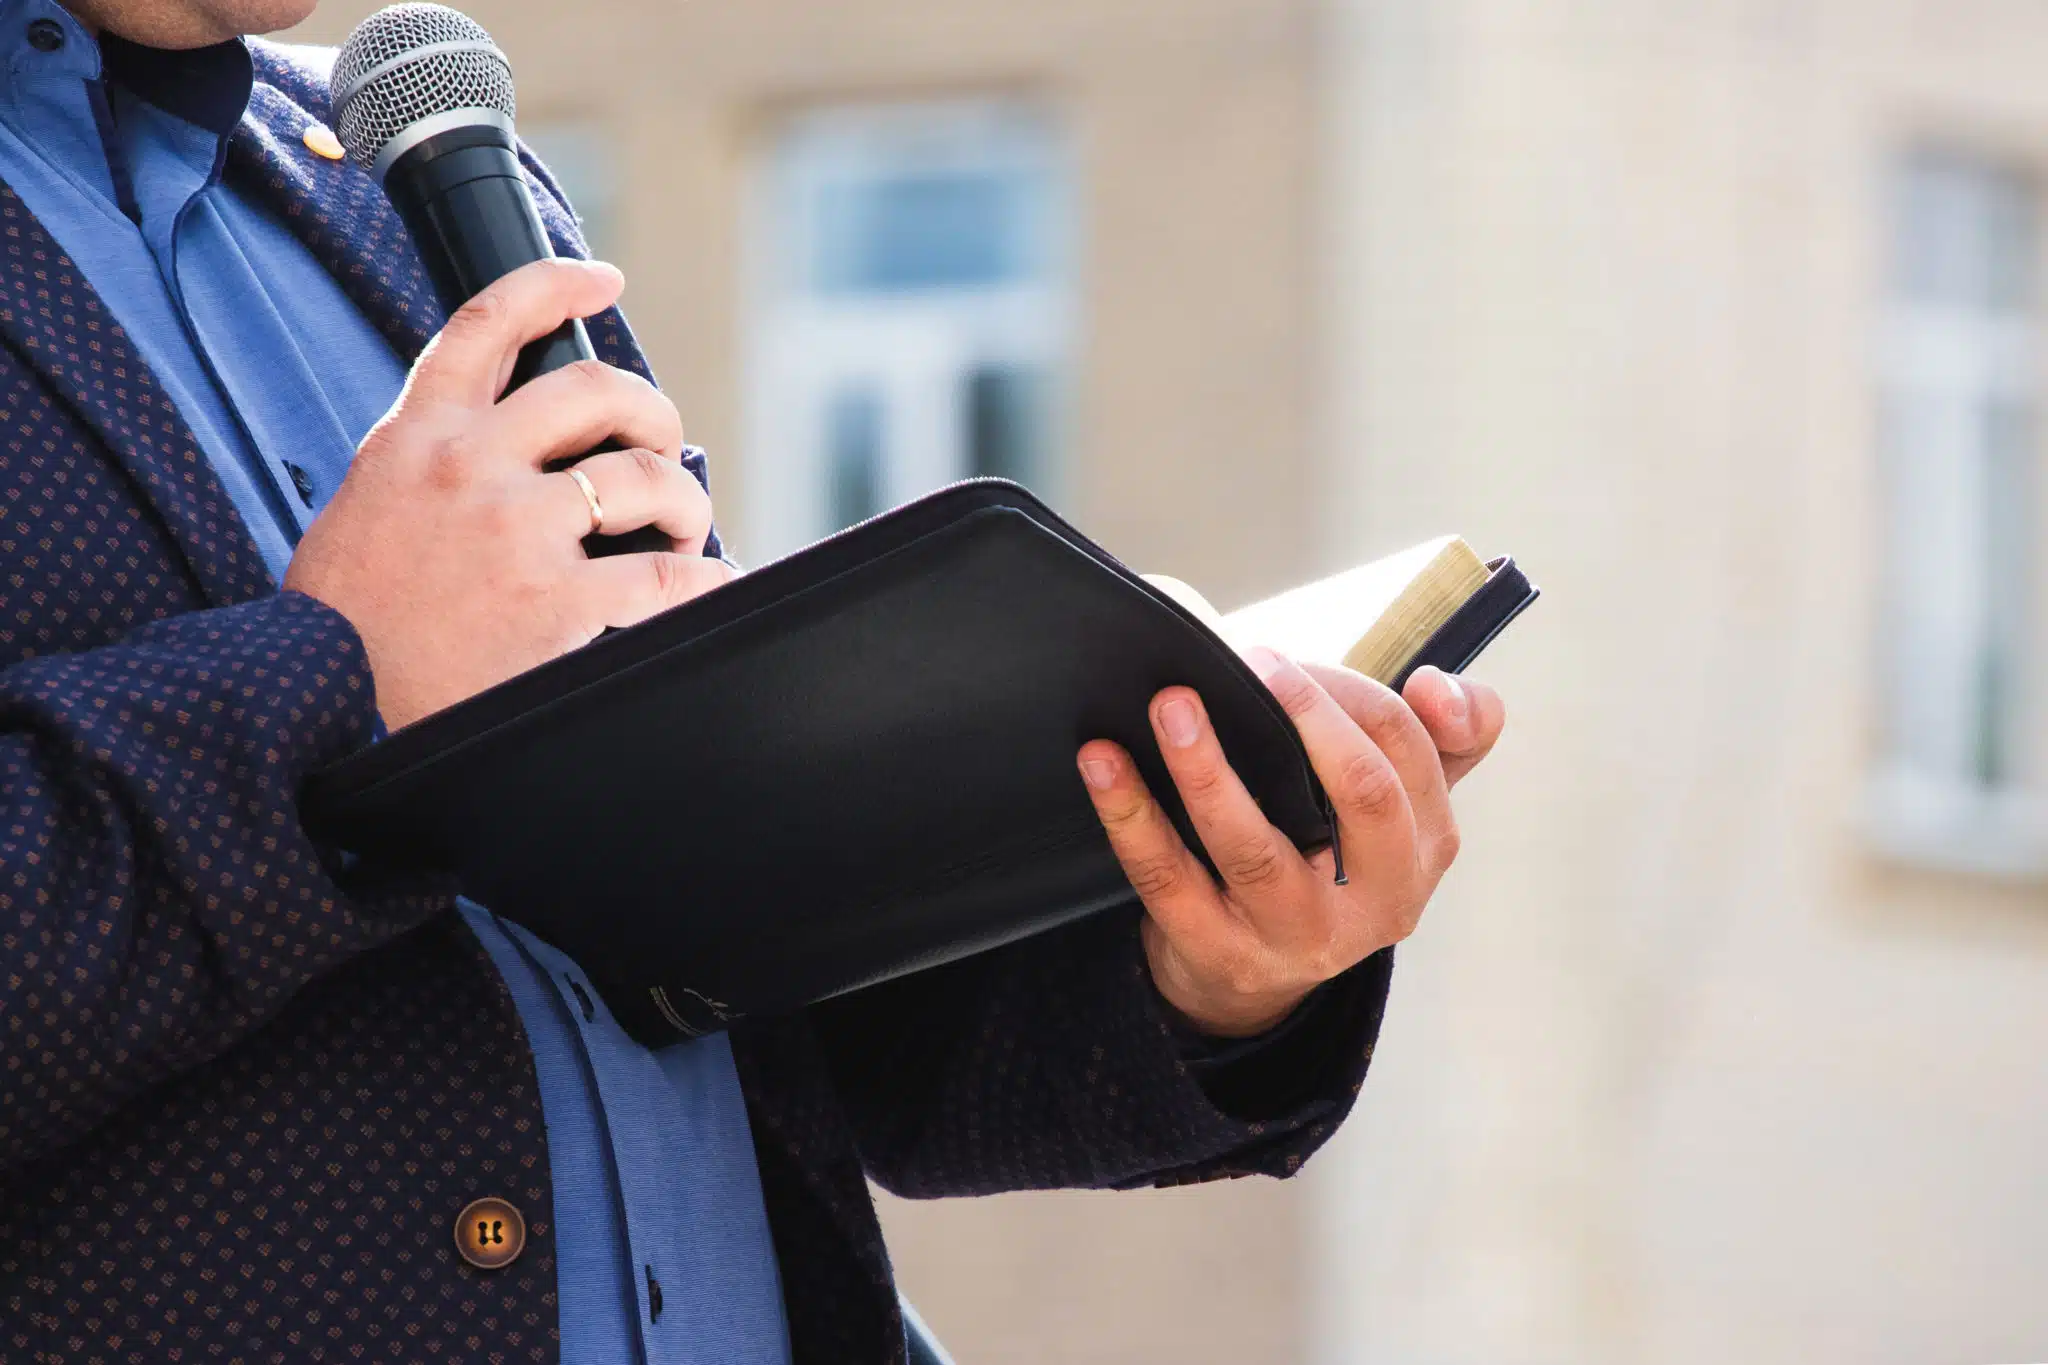 A preacher with a microphone in his hand holds a Bible and reads - what does the bible say about transgender